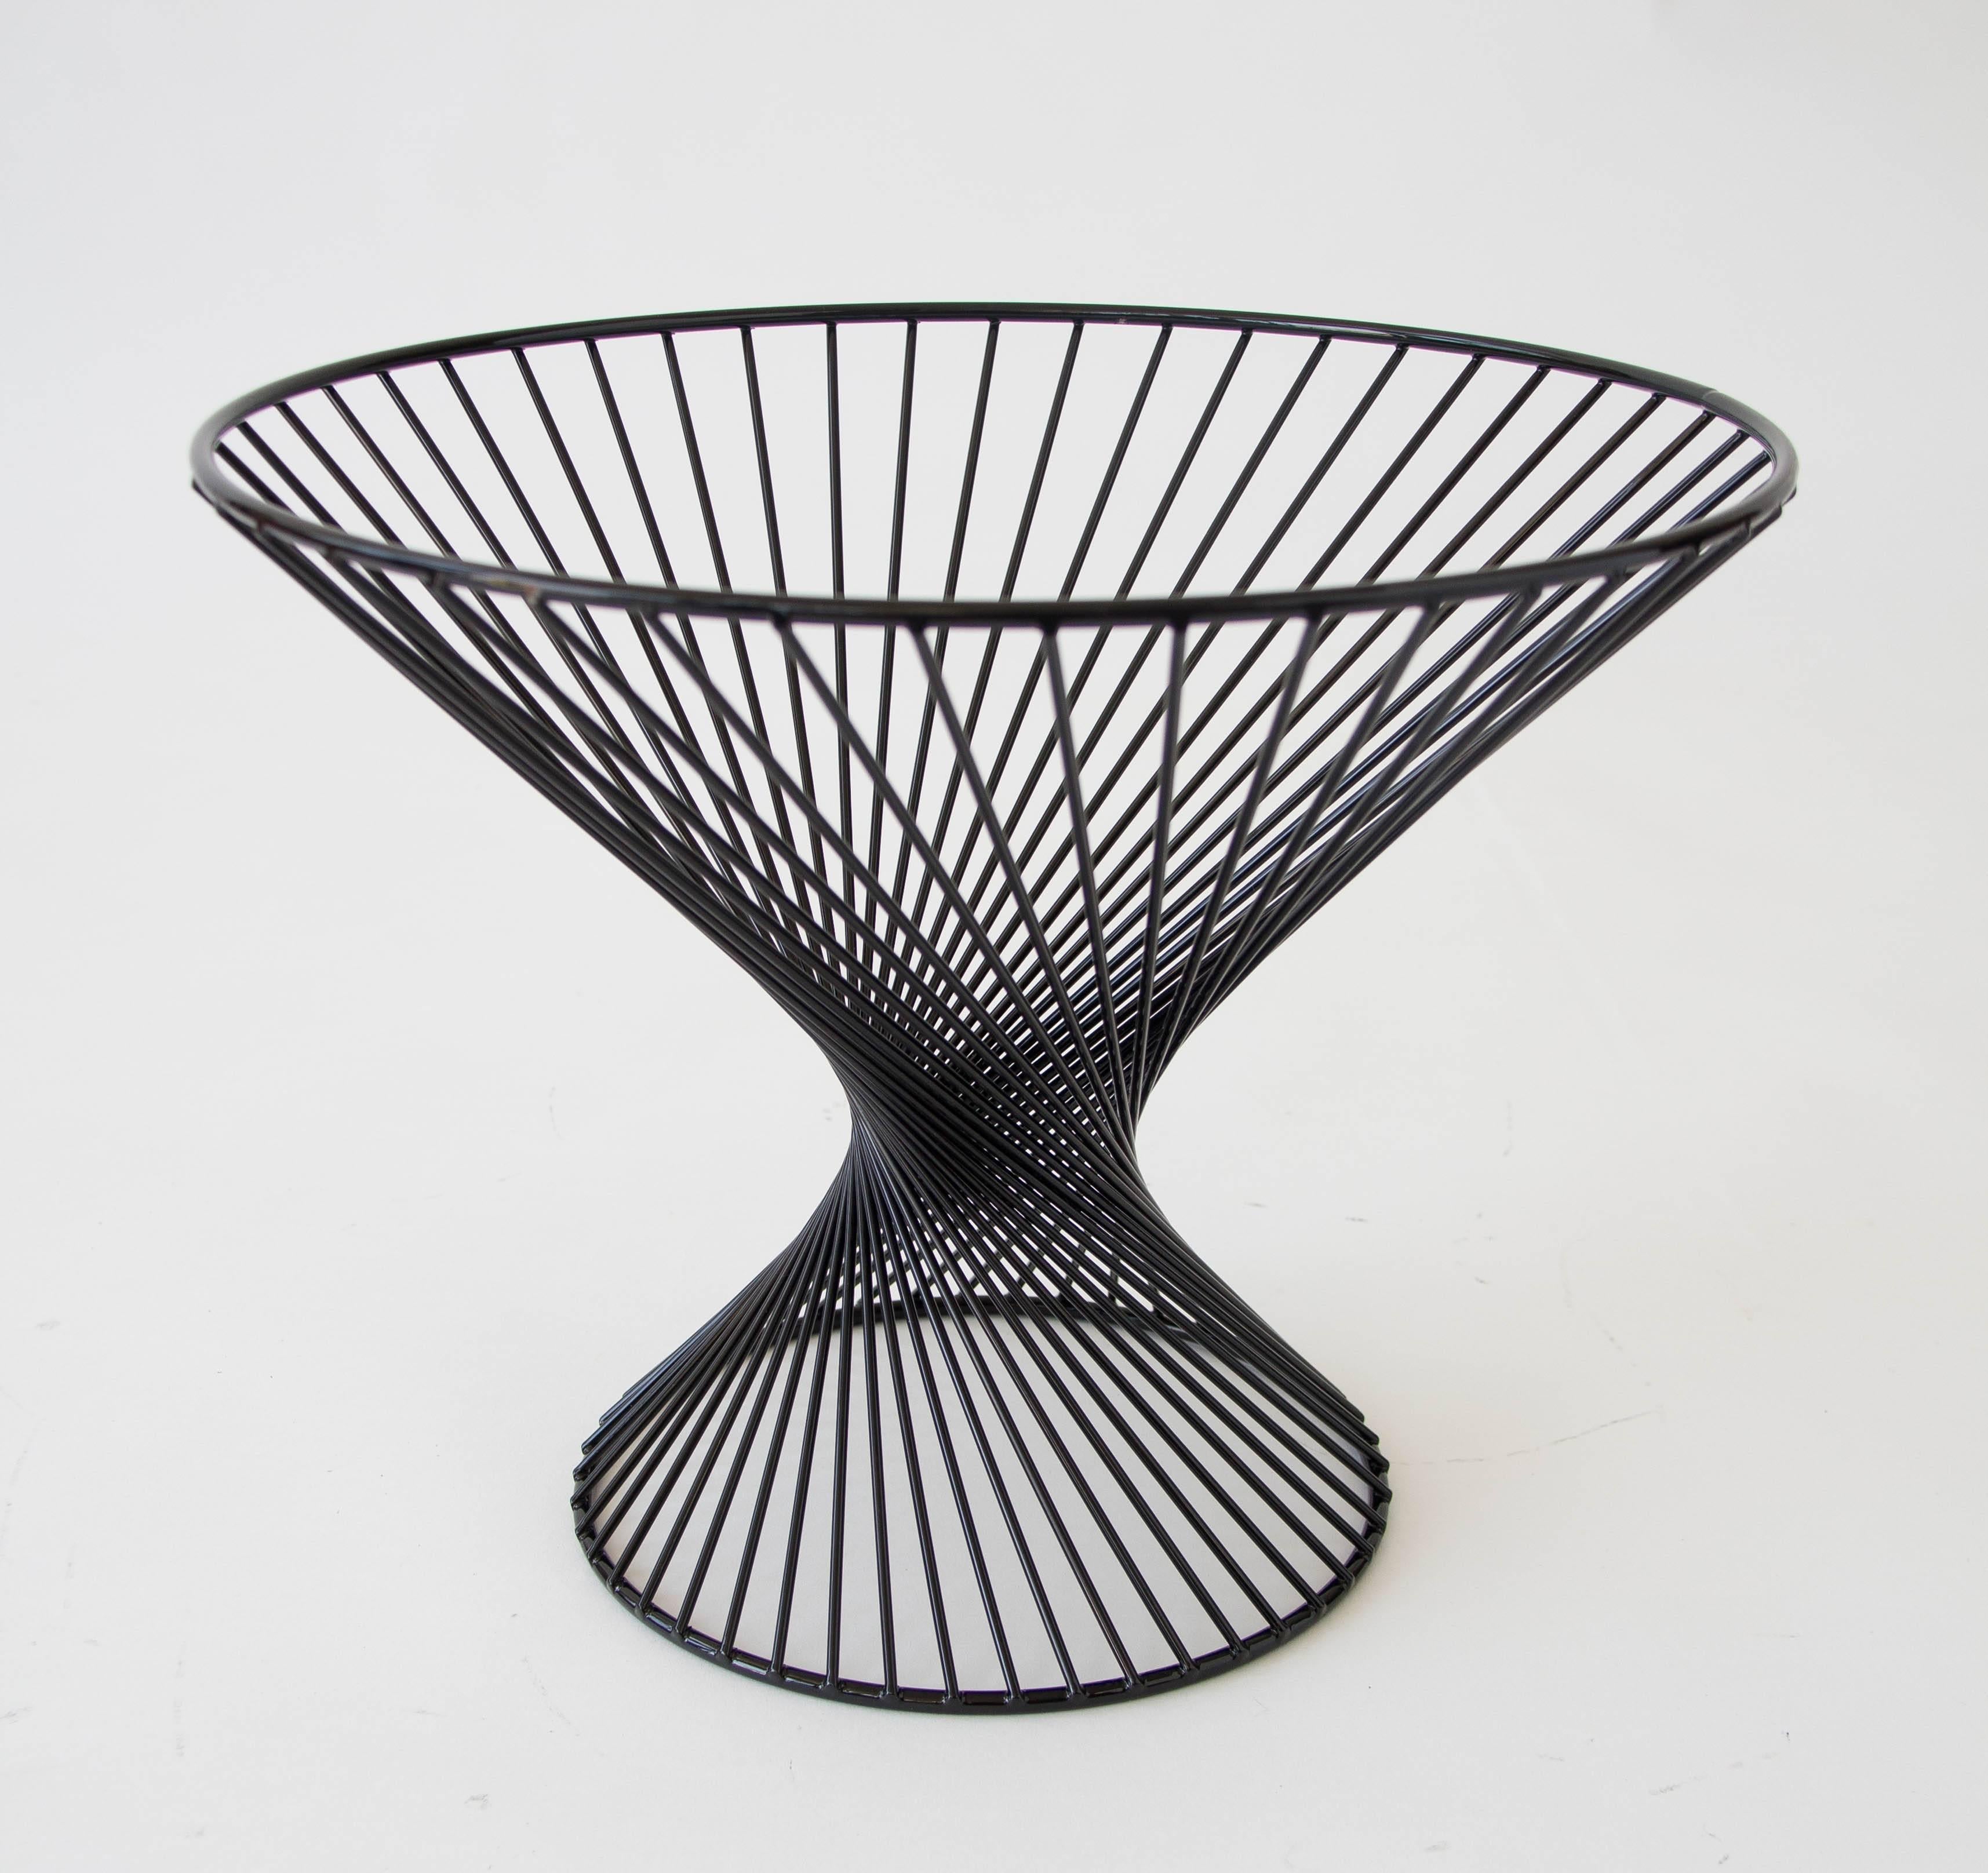 A powder-coated wire fruit basket The piece has an hourglass shape with rotated spokes forming a sculptural design. 

Condition: Excellent restored condition; professionally powder-coated. 

Dimension: 15